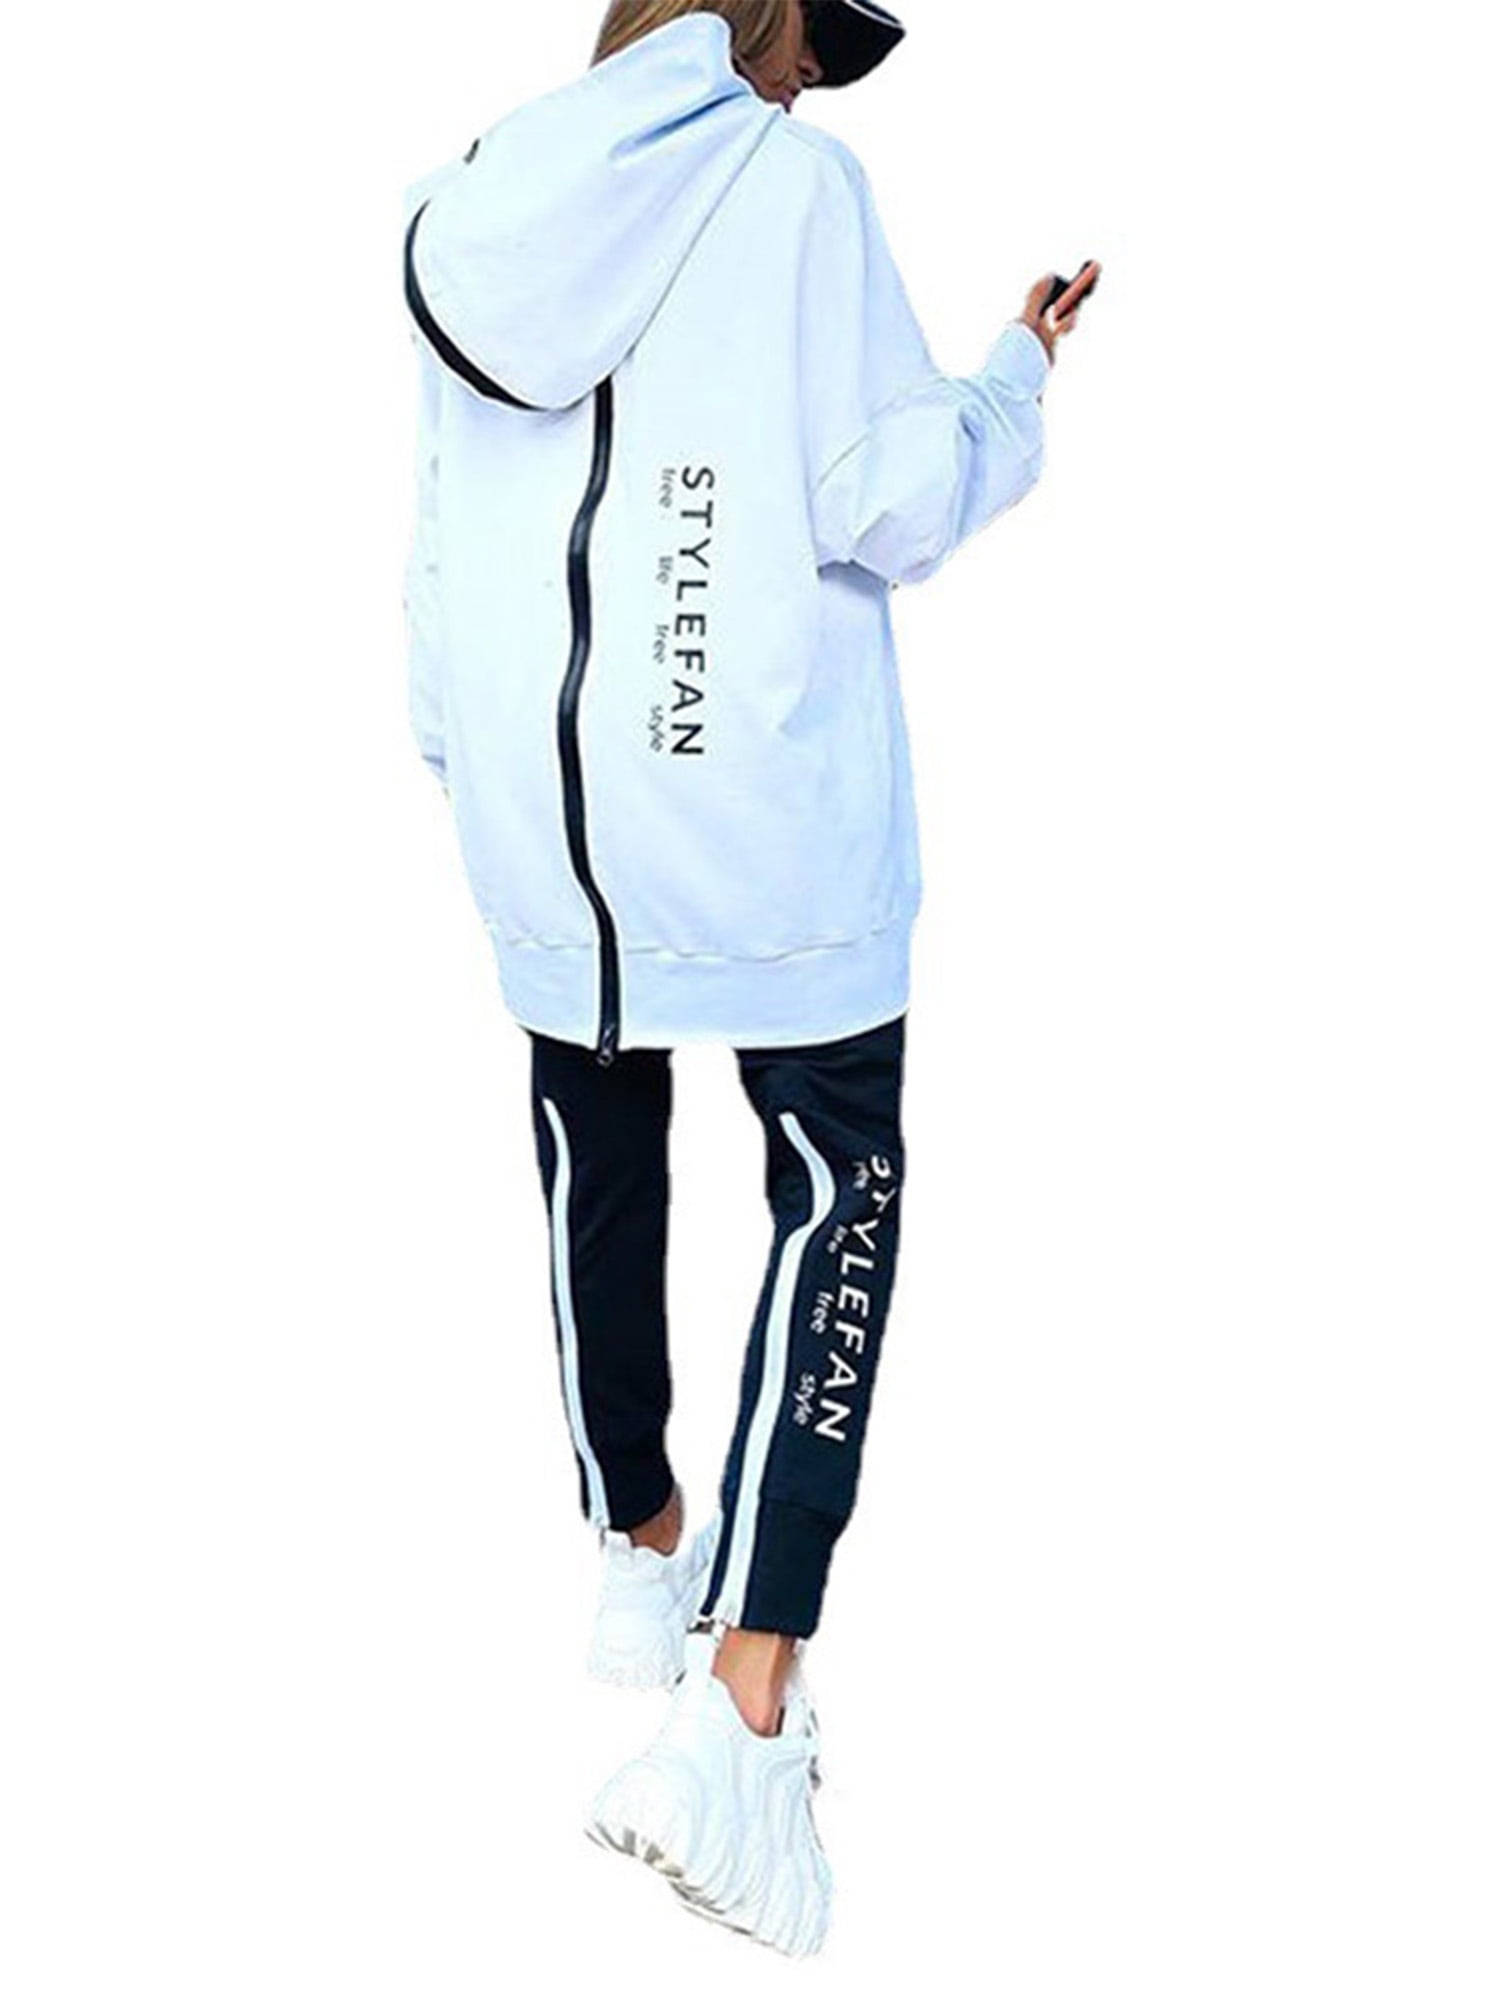 Track Suits for Women Set Long Sleeve Zipper Hoodie Jacket with Sweatpants 2 Piece Sweatsuit Outfits 